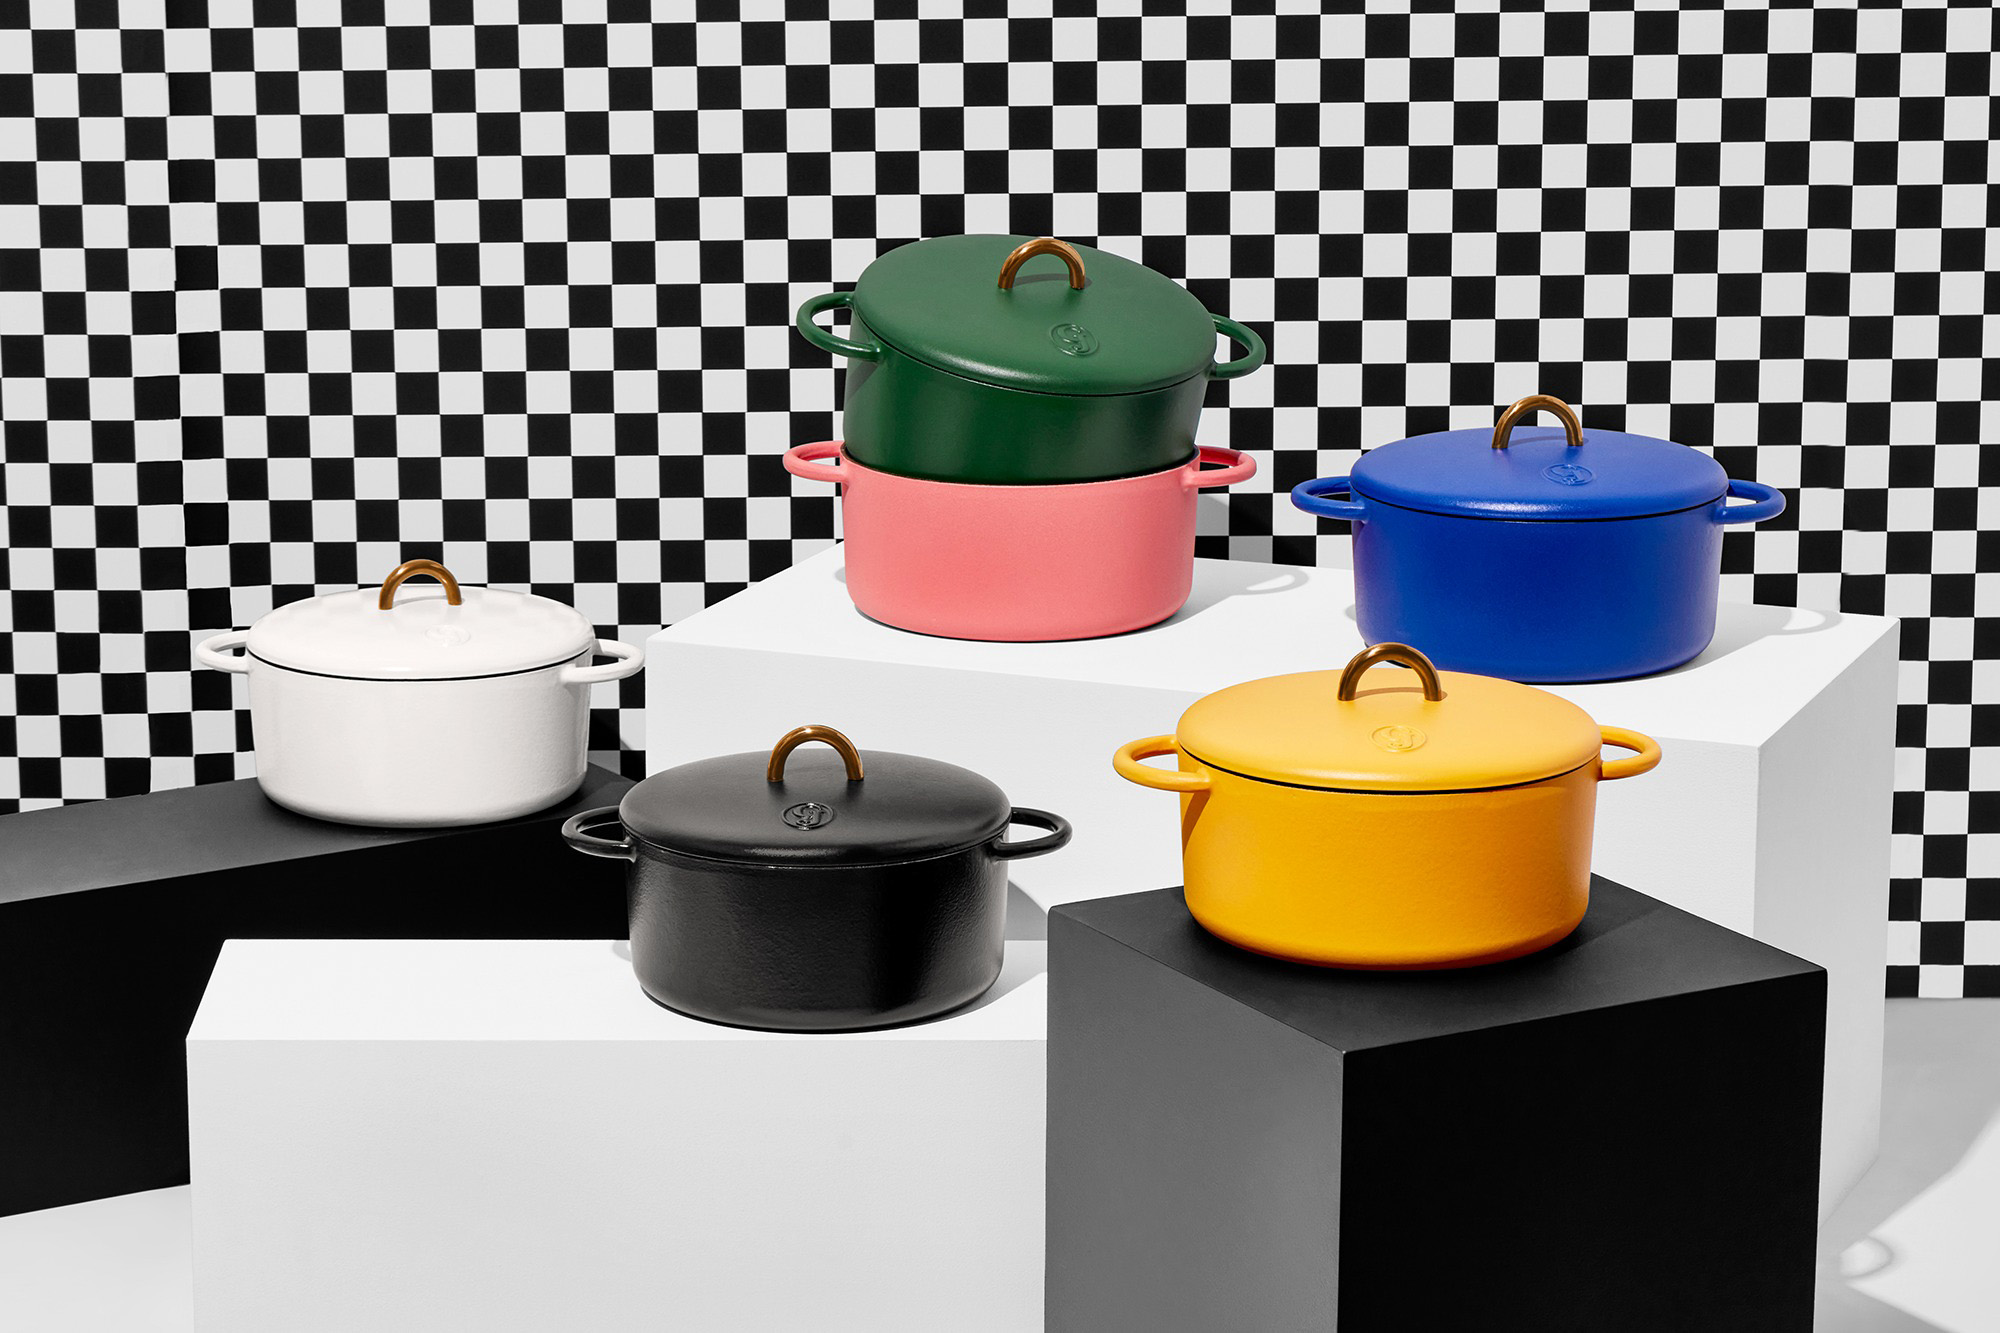 25 Best Non-Toxic Cookware Brands in 2024, Tested & Reviewed • Sustainably  Kind Living